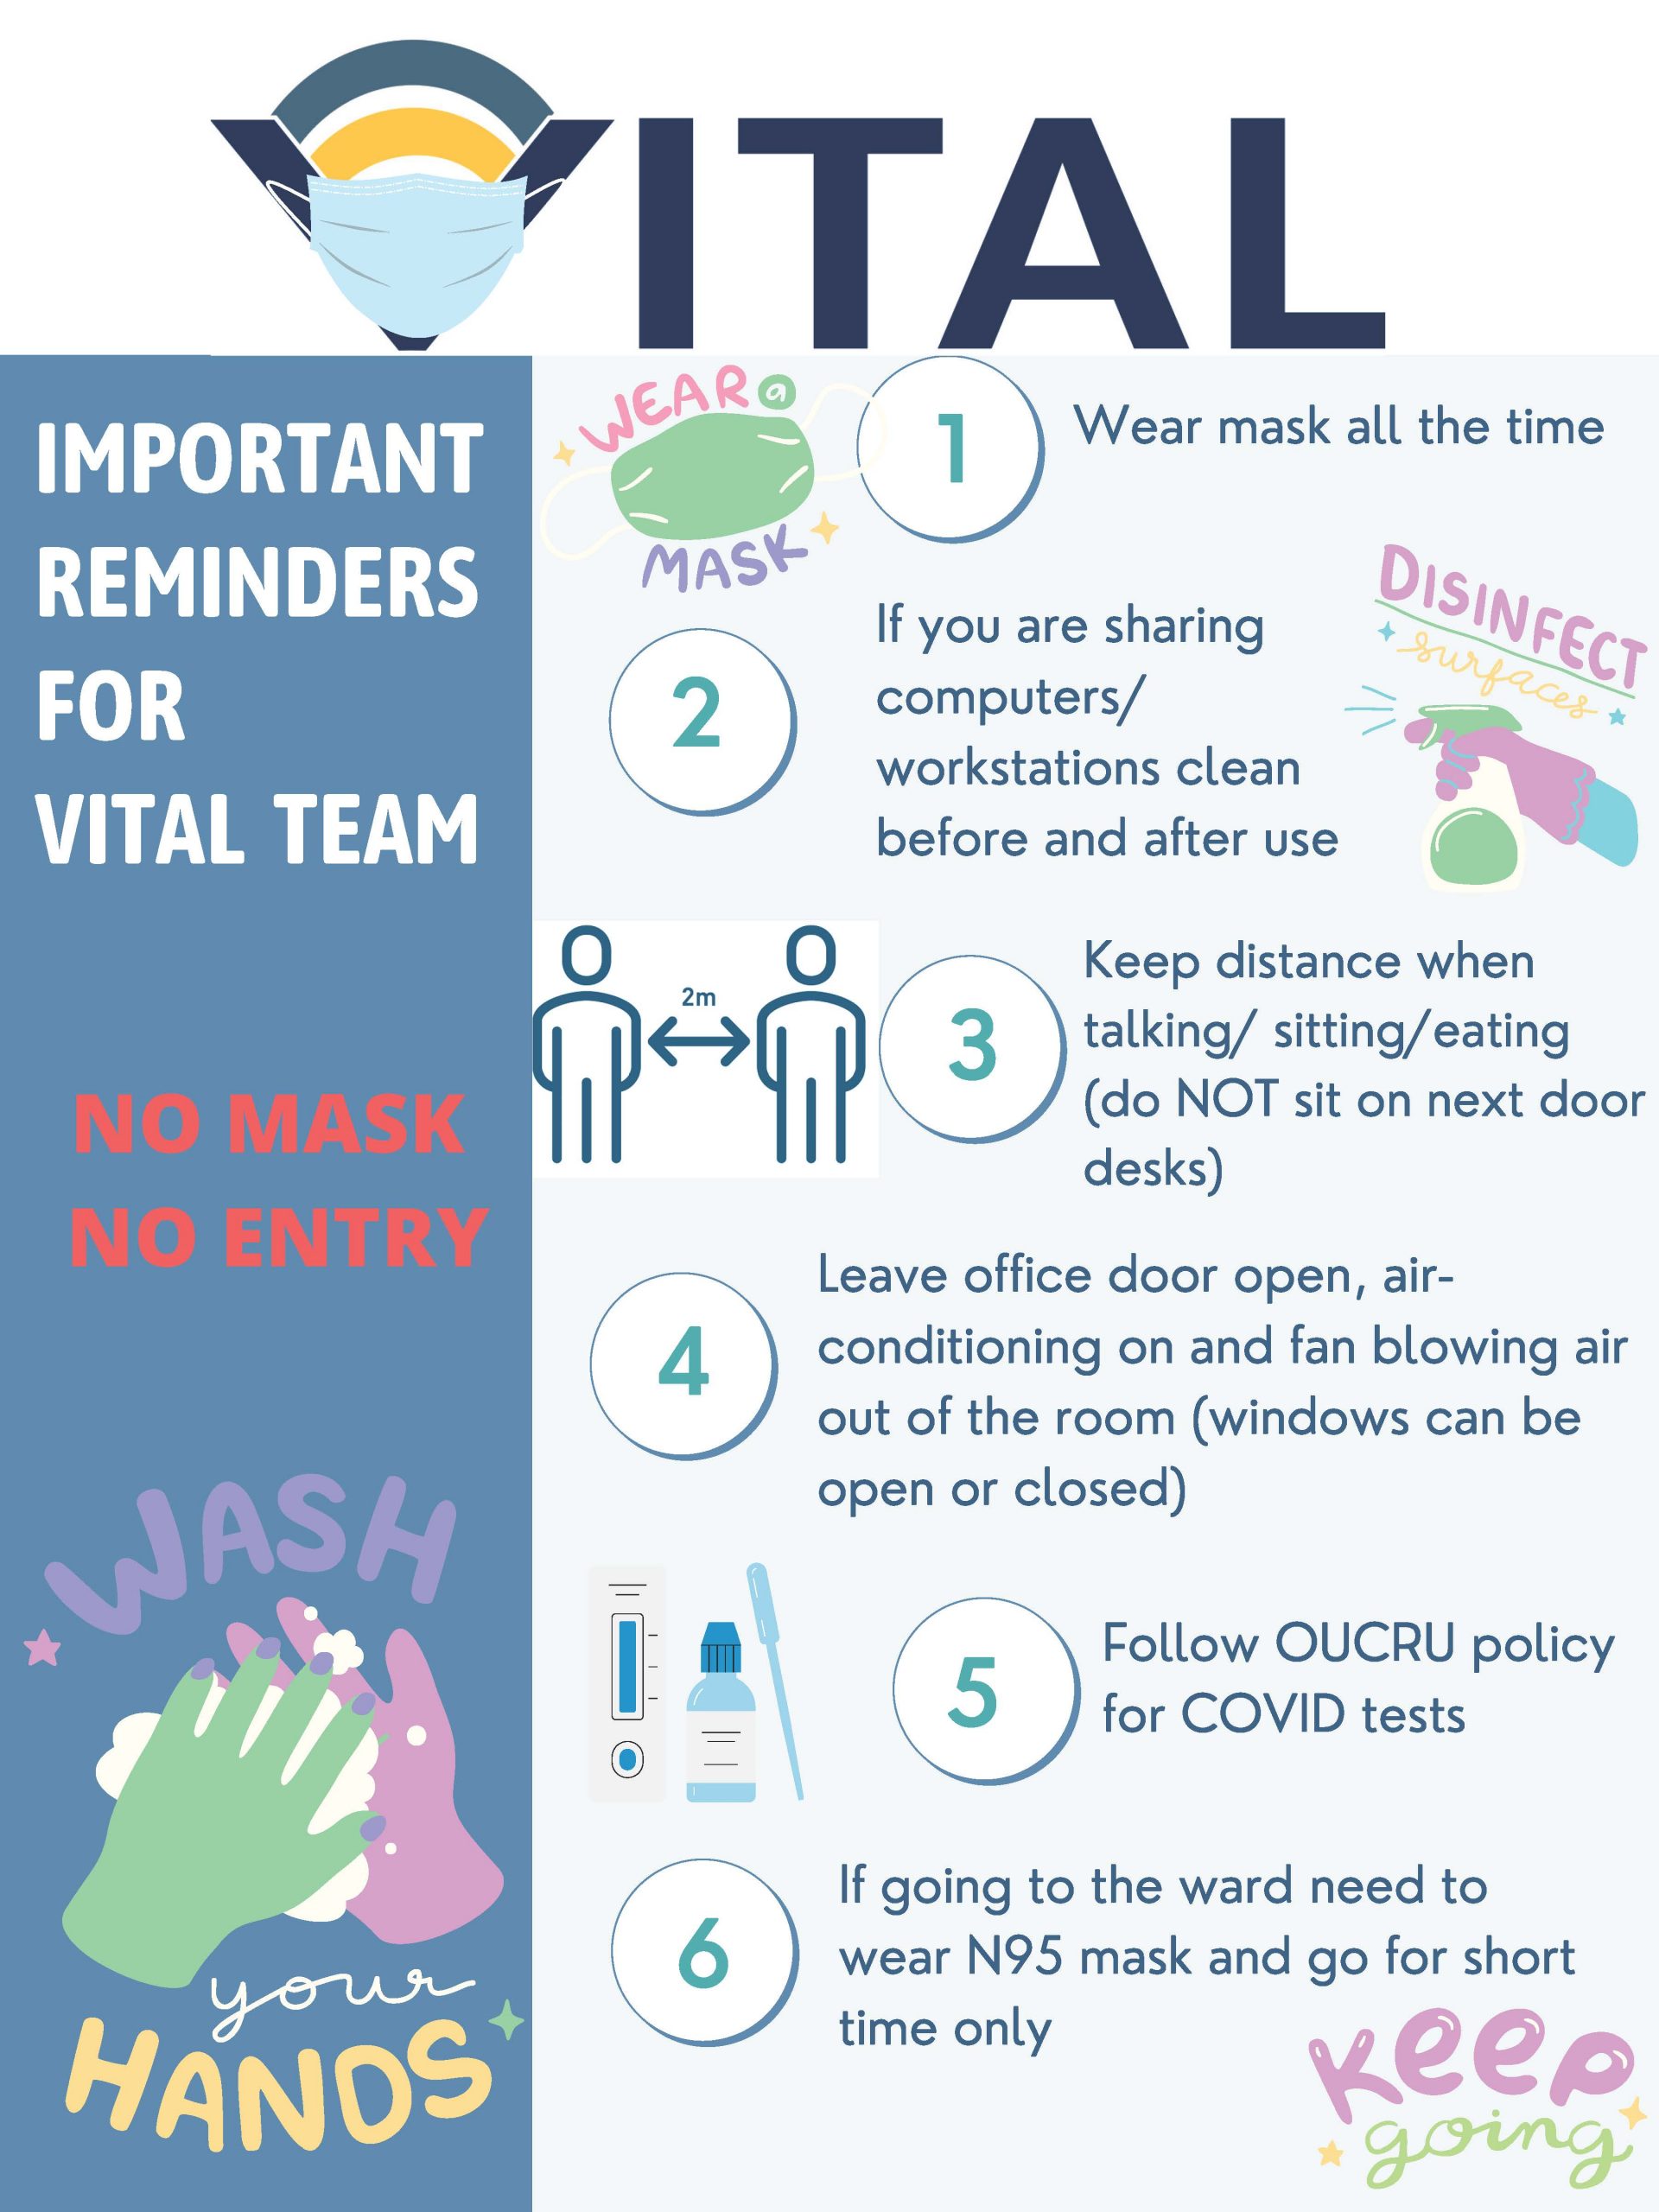 Important reminders for VITAL team